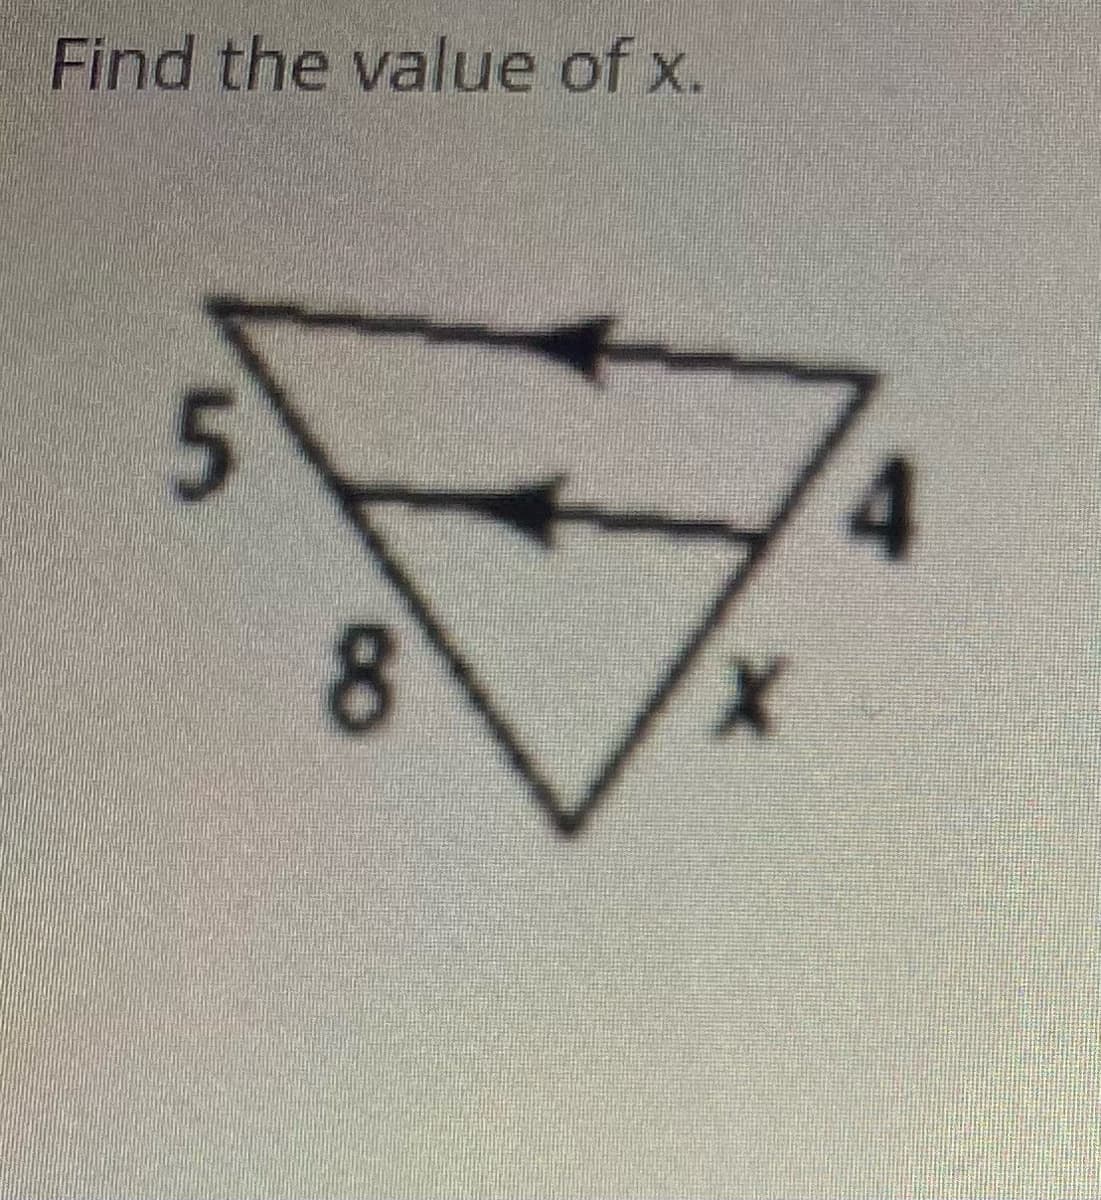 Find the value of x.
4.
8
